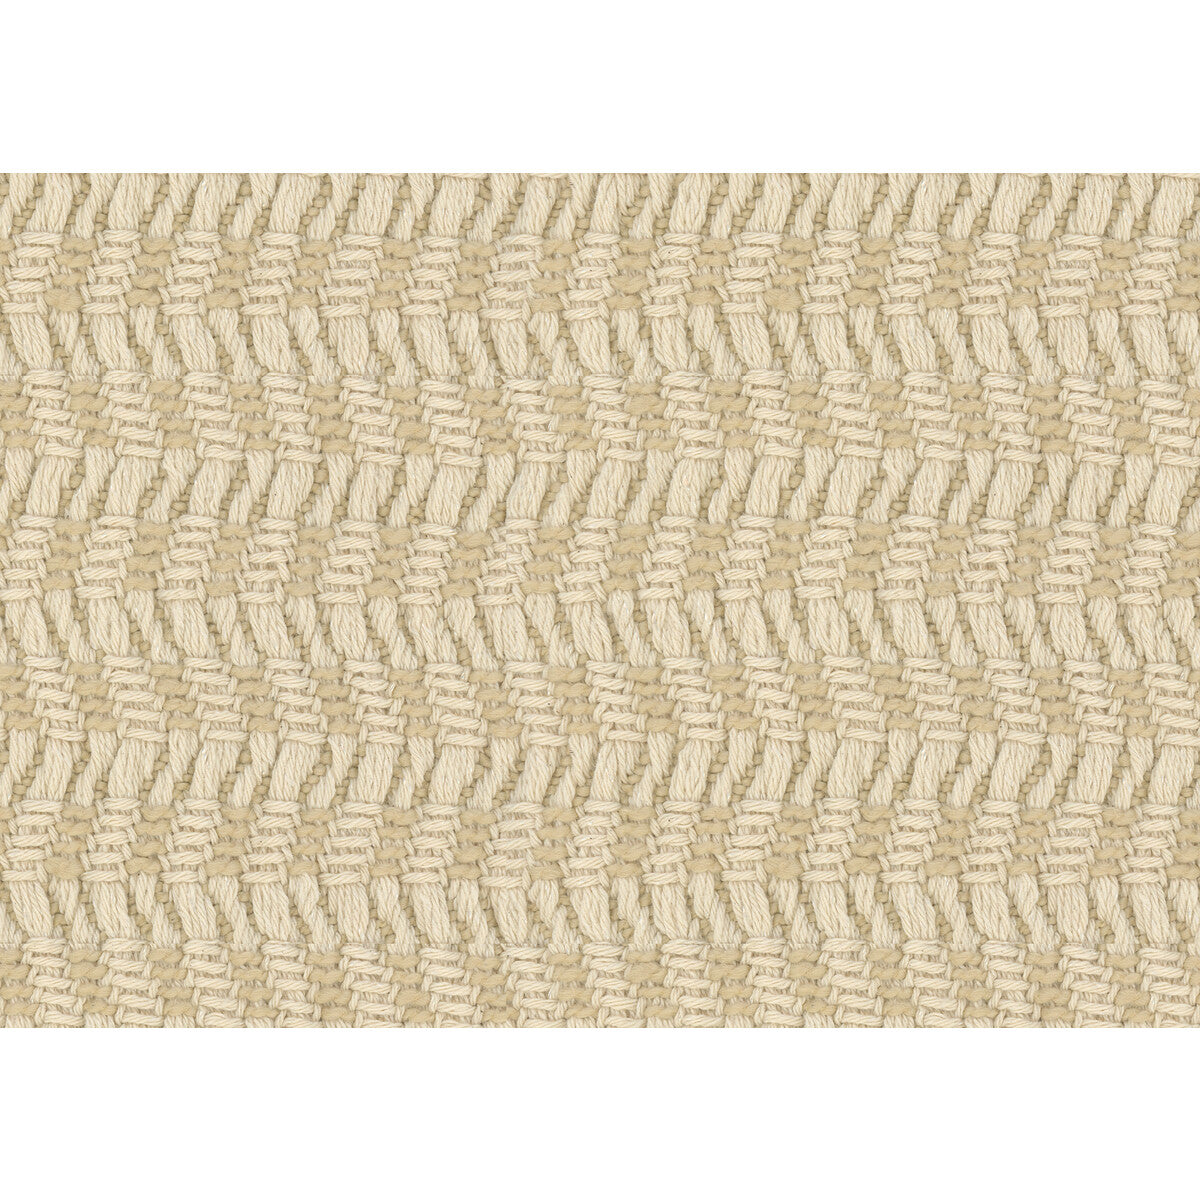 Jumper fabric in toast color - pattern GWF-3714.16.0 - by Lee Jofa Modern in the Kelly Wearstler Textures collection